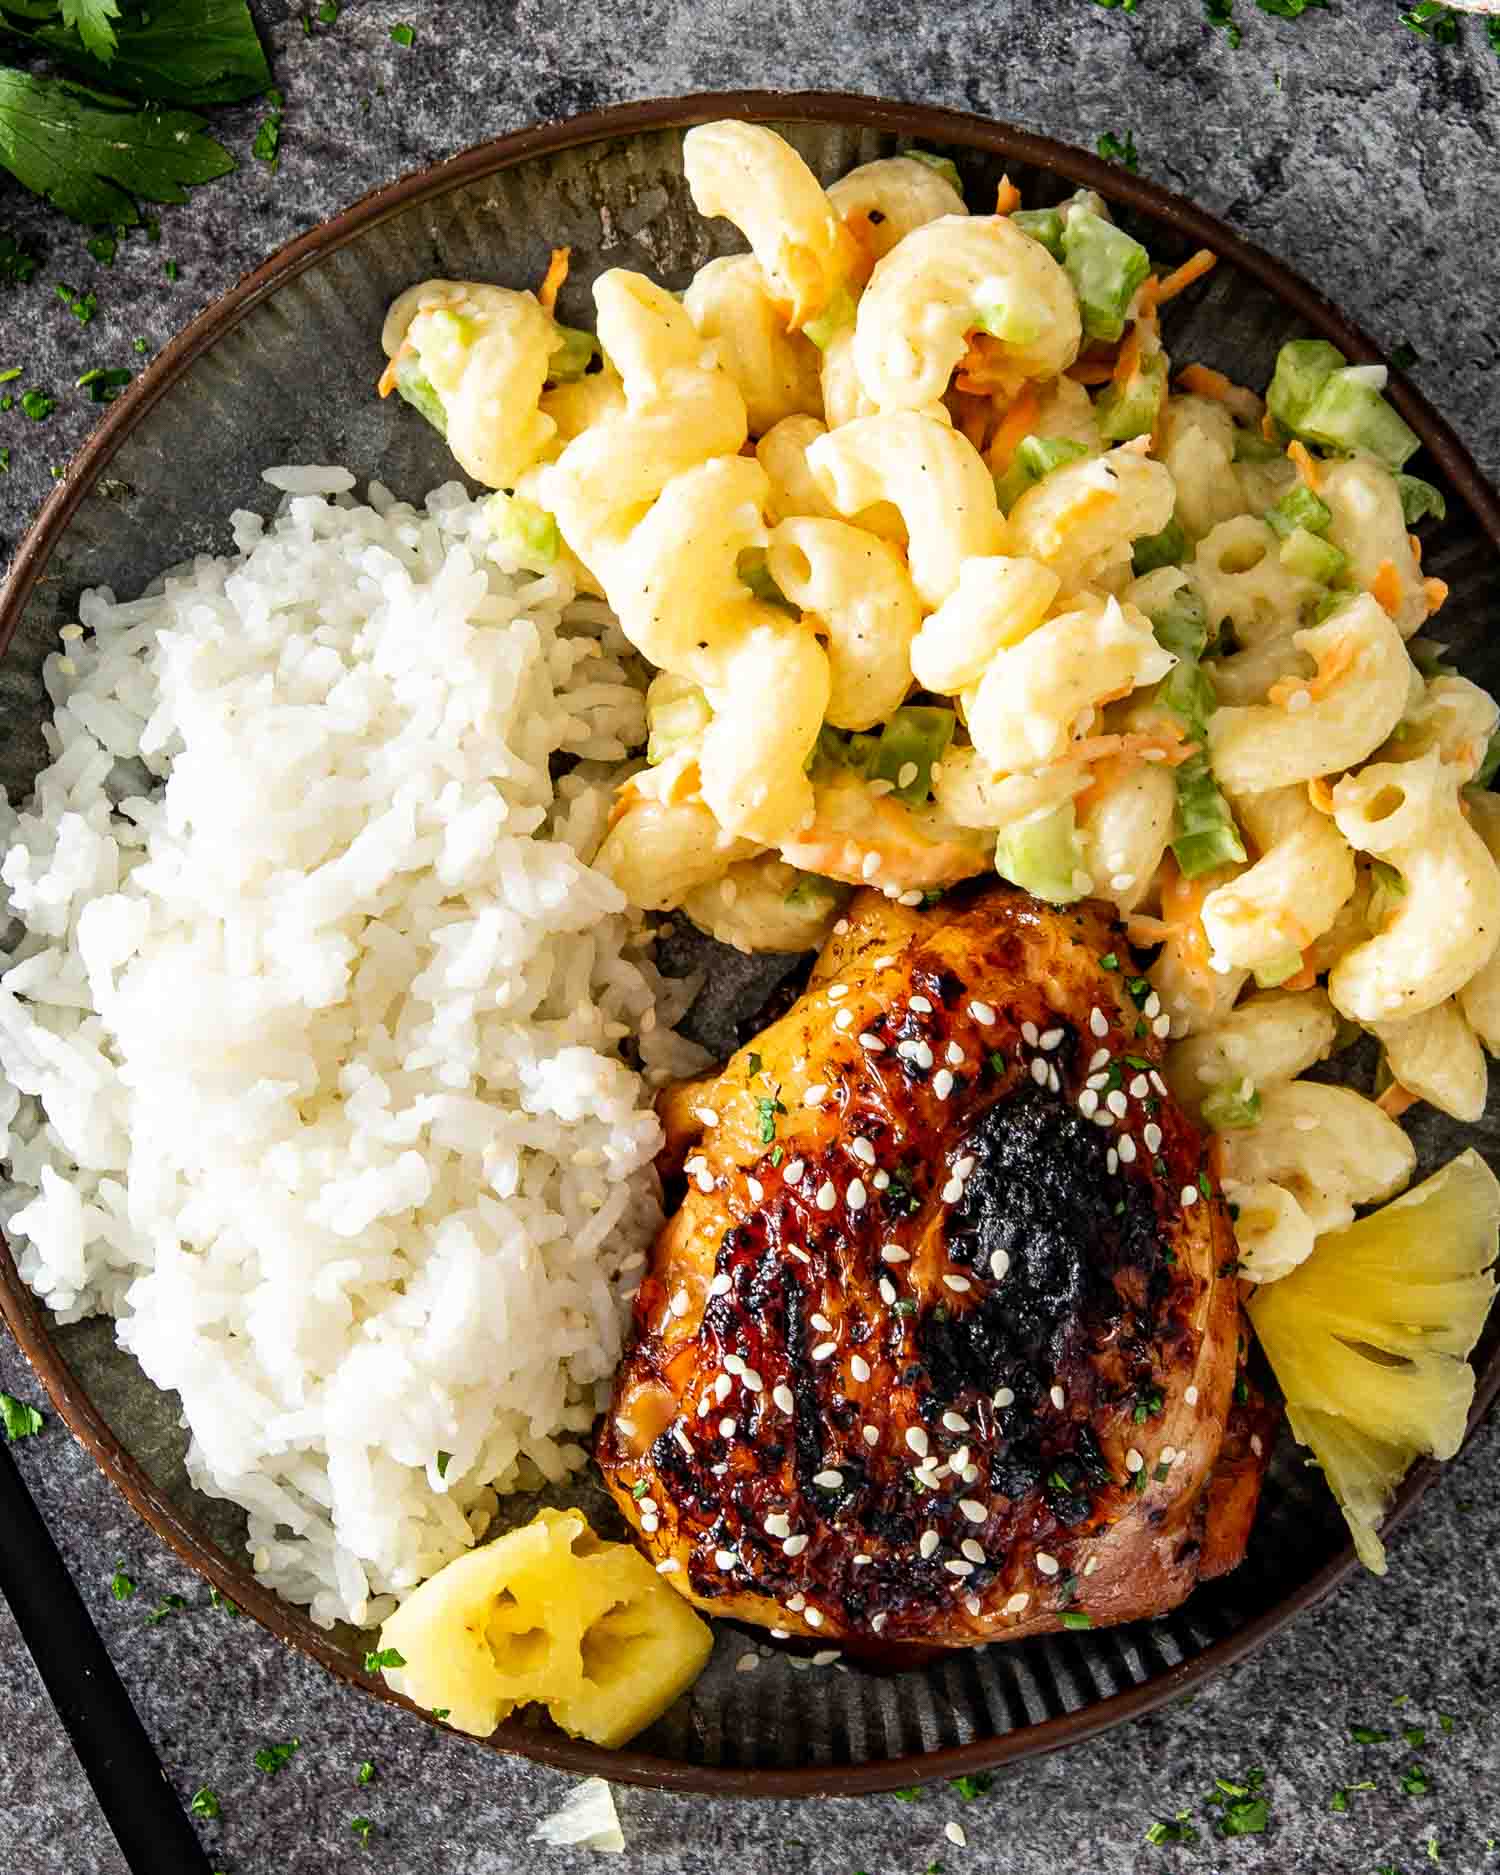 a huli huli chicken thigh on a plate along some cooked rice and macaroni salad.